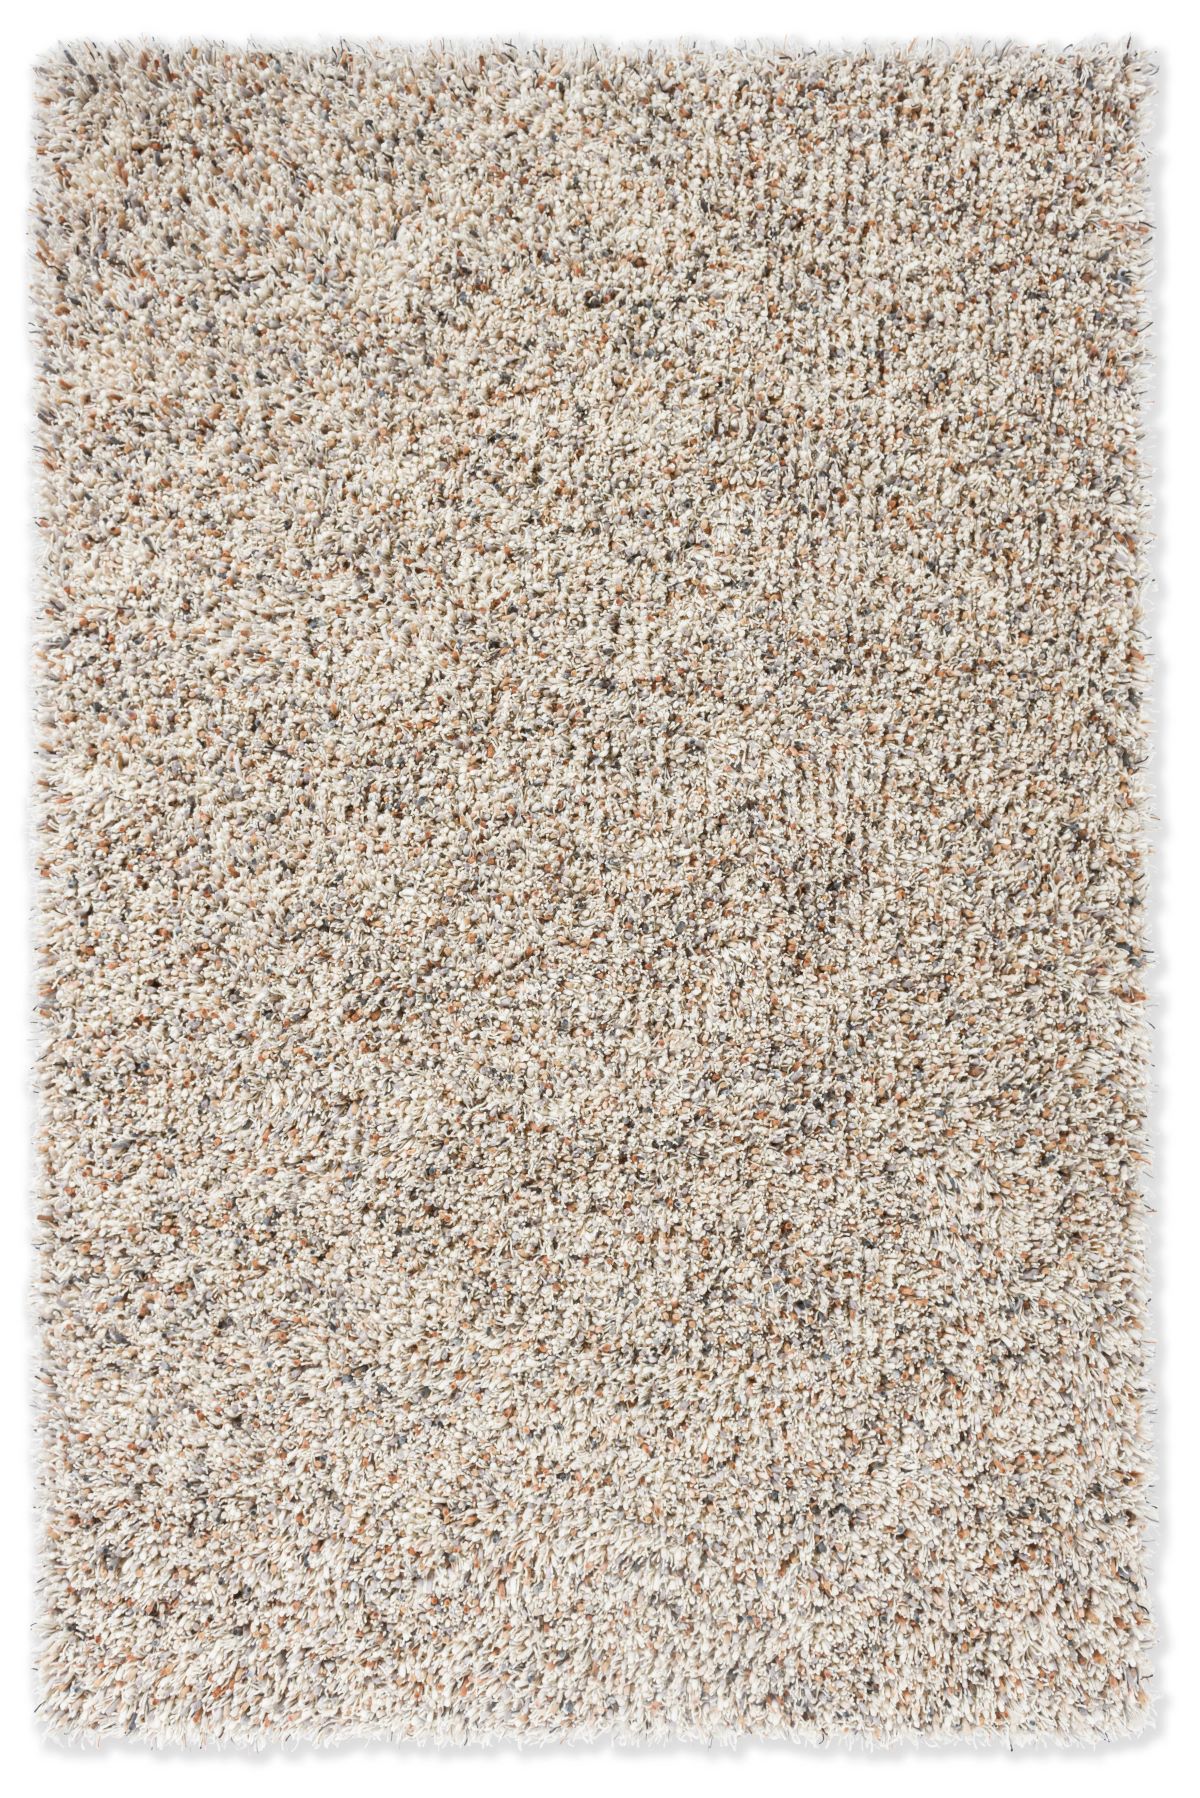 brink-and-campman-rug-spring-down-to-earth-059111